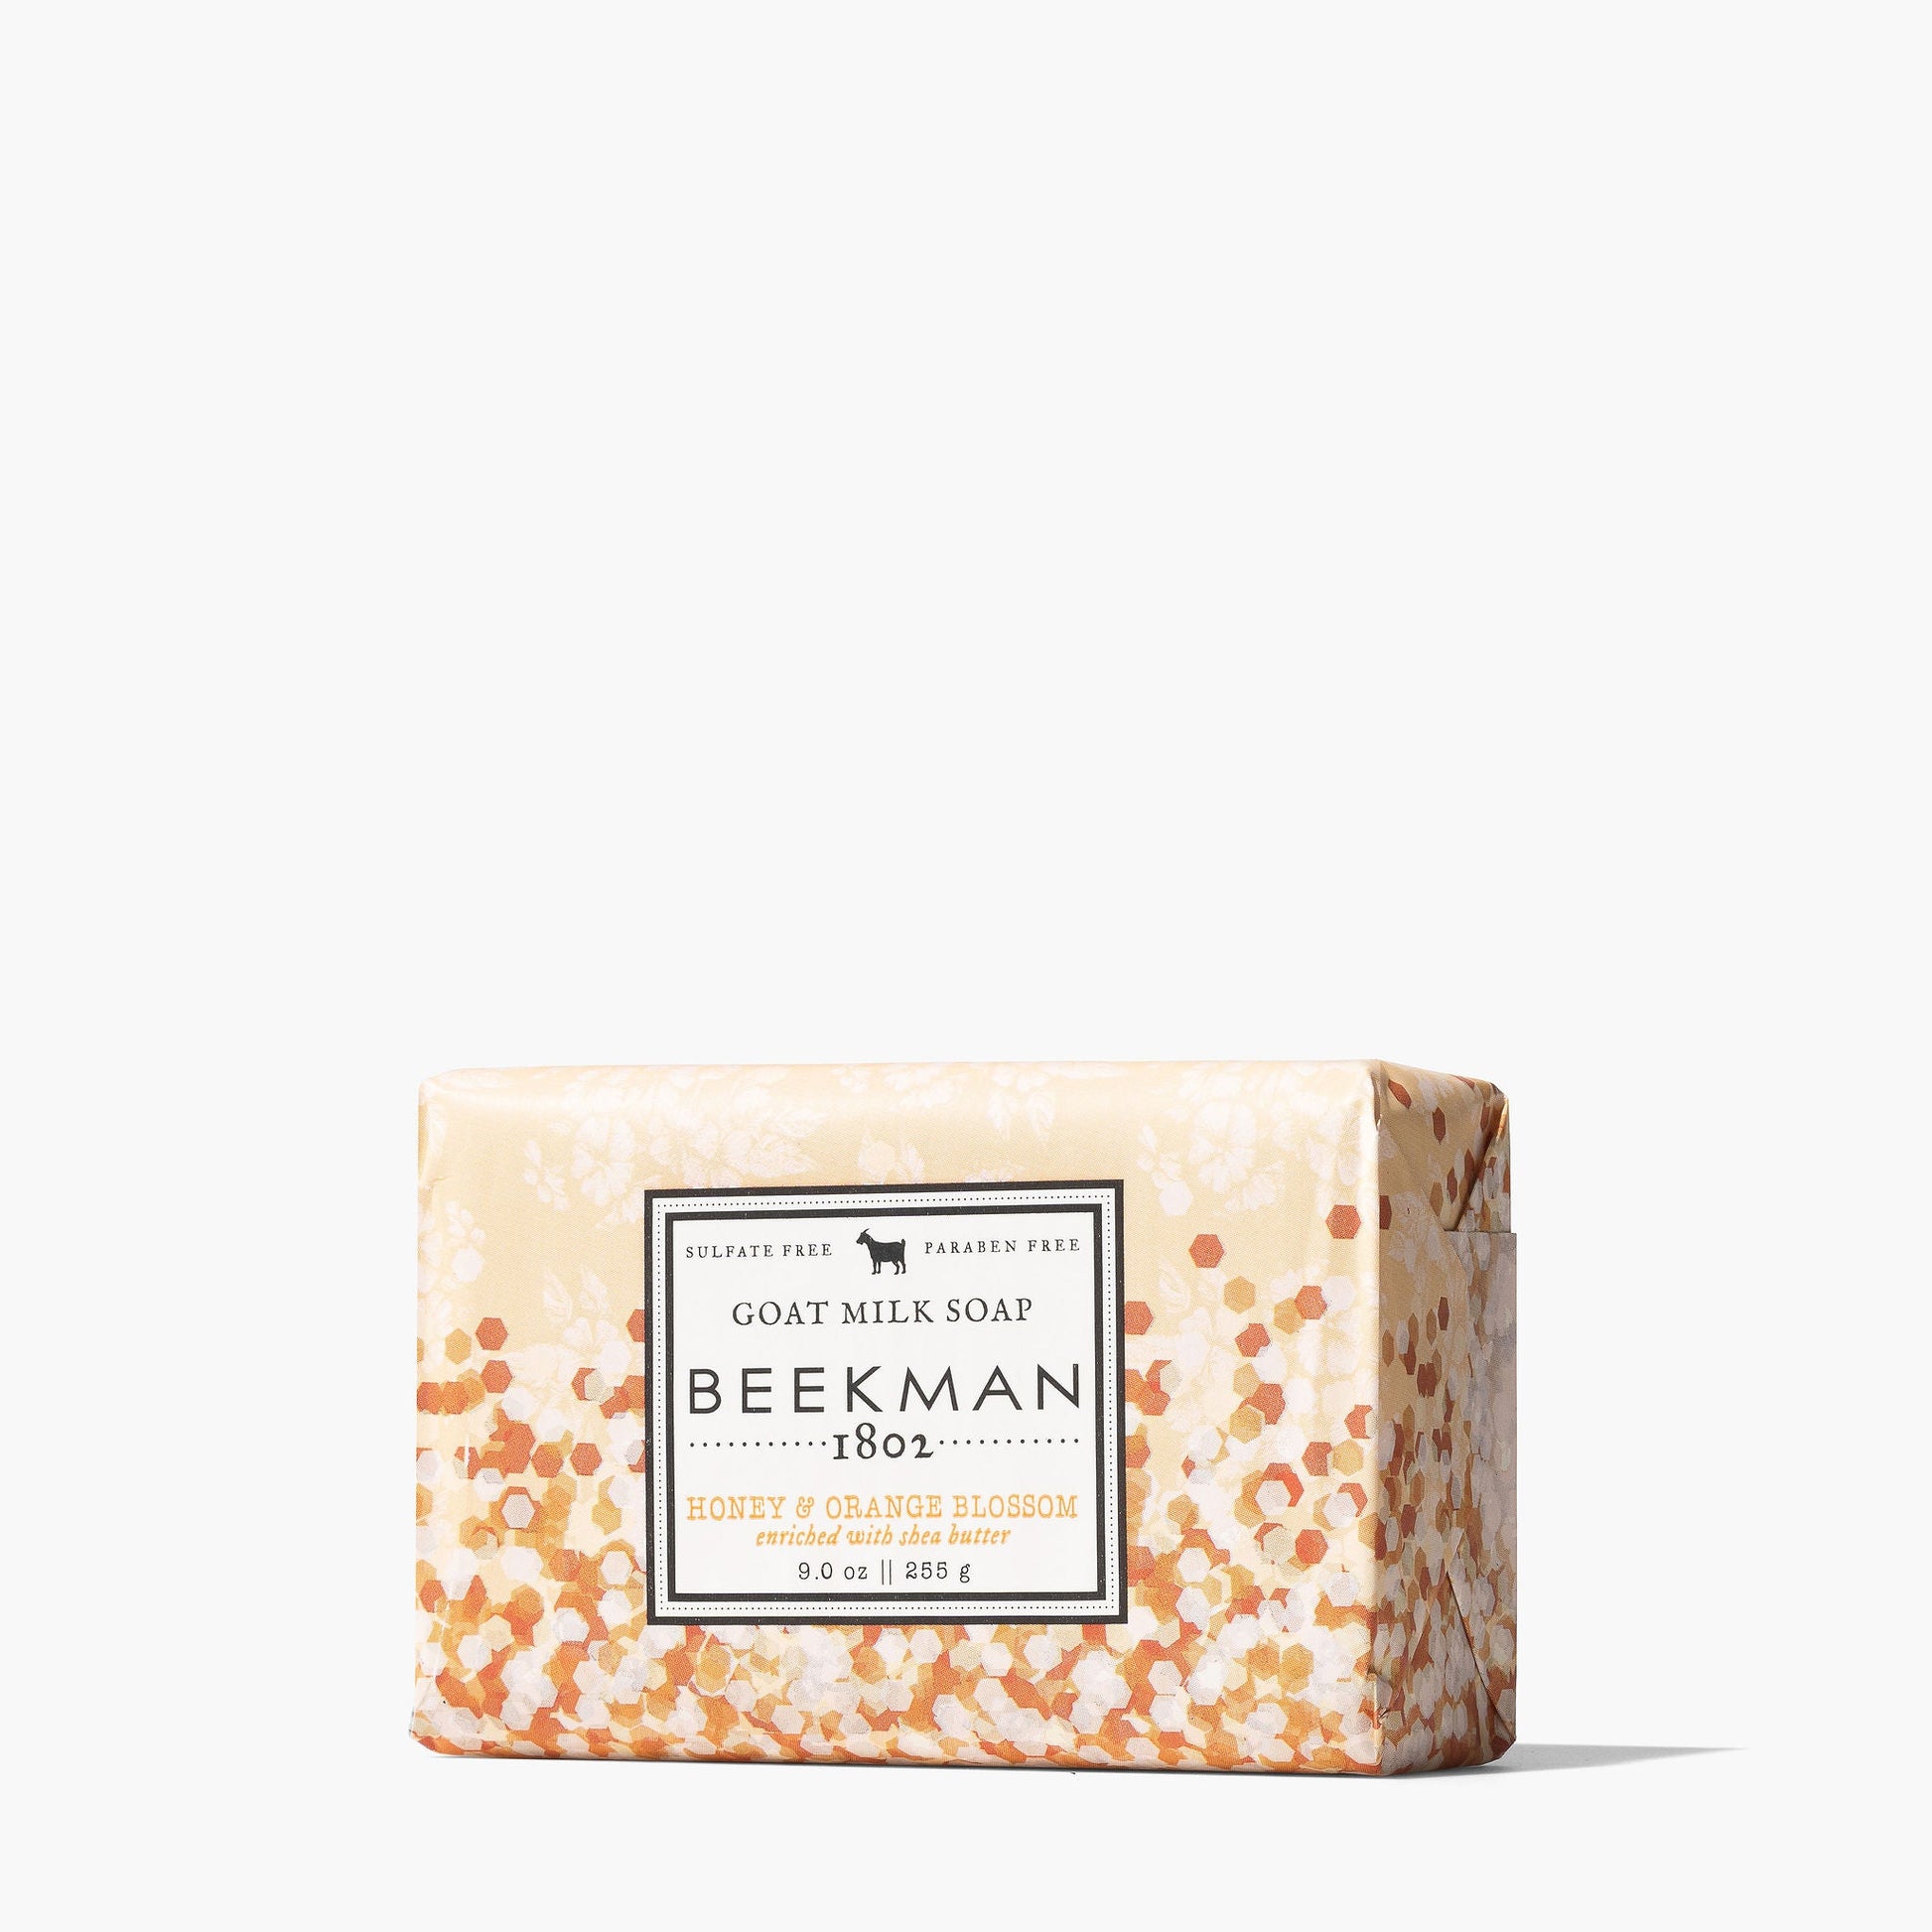 bar of honey and orange blossom soap wrapped in paper with an ombre pattern of dark to light orange dots.